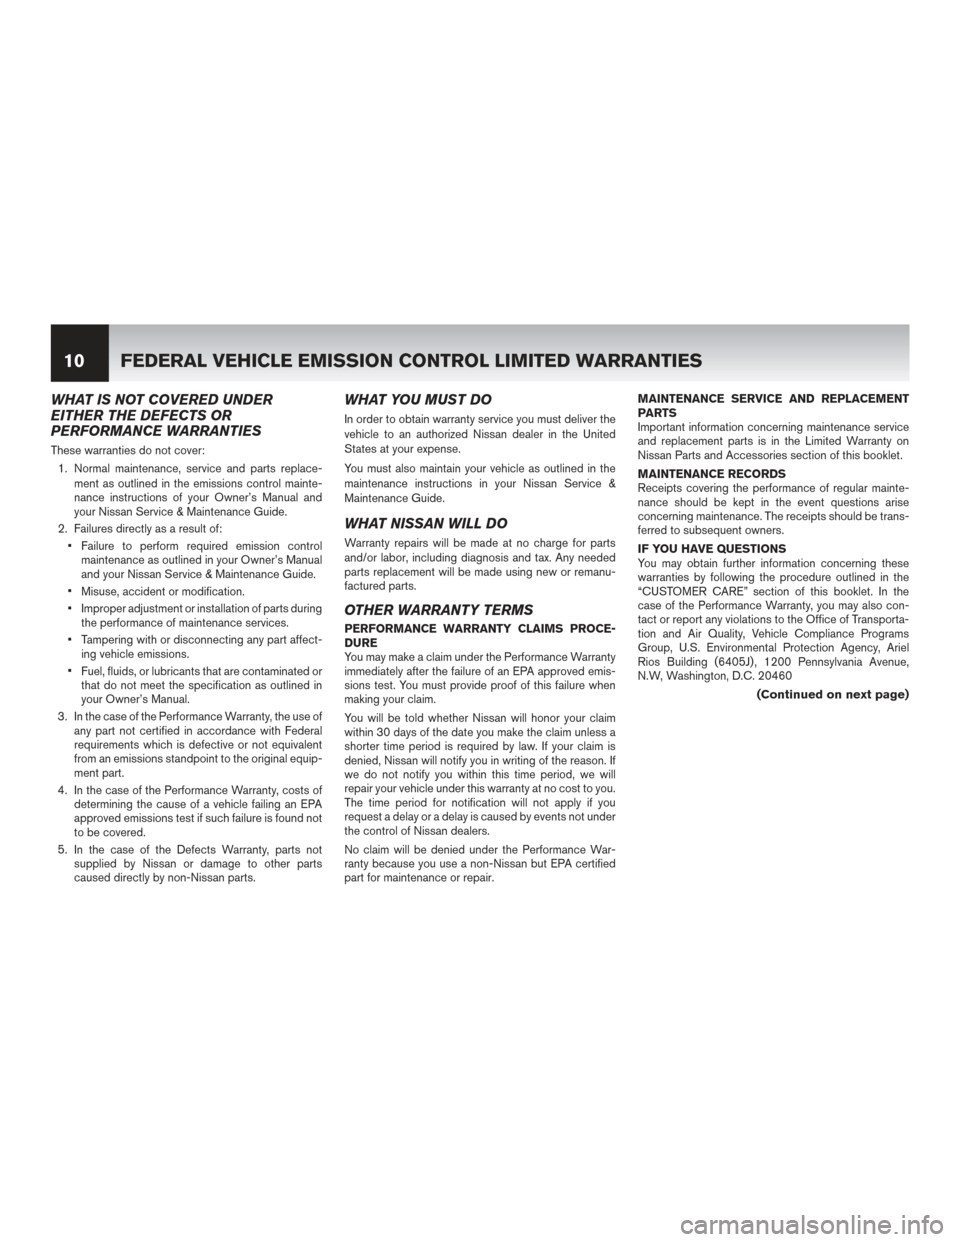 NISSAN ROGUE 2014 2.G Warranty Booklet WHAT IS NOT COVERED UNDER
EITHER THE DEFECTS OR
PERFORMANCE WARRANTIES
These warranties do not cover:1. Normal maintenance, service and parts replace- ment as outlined in the emissions control mainte-